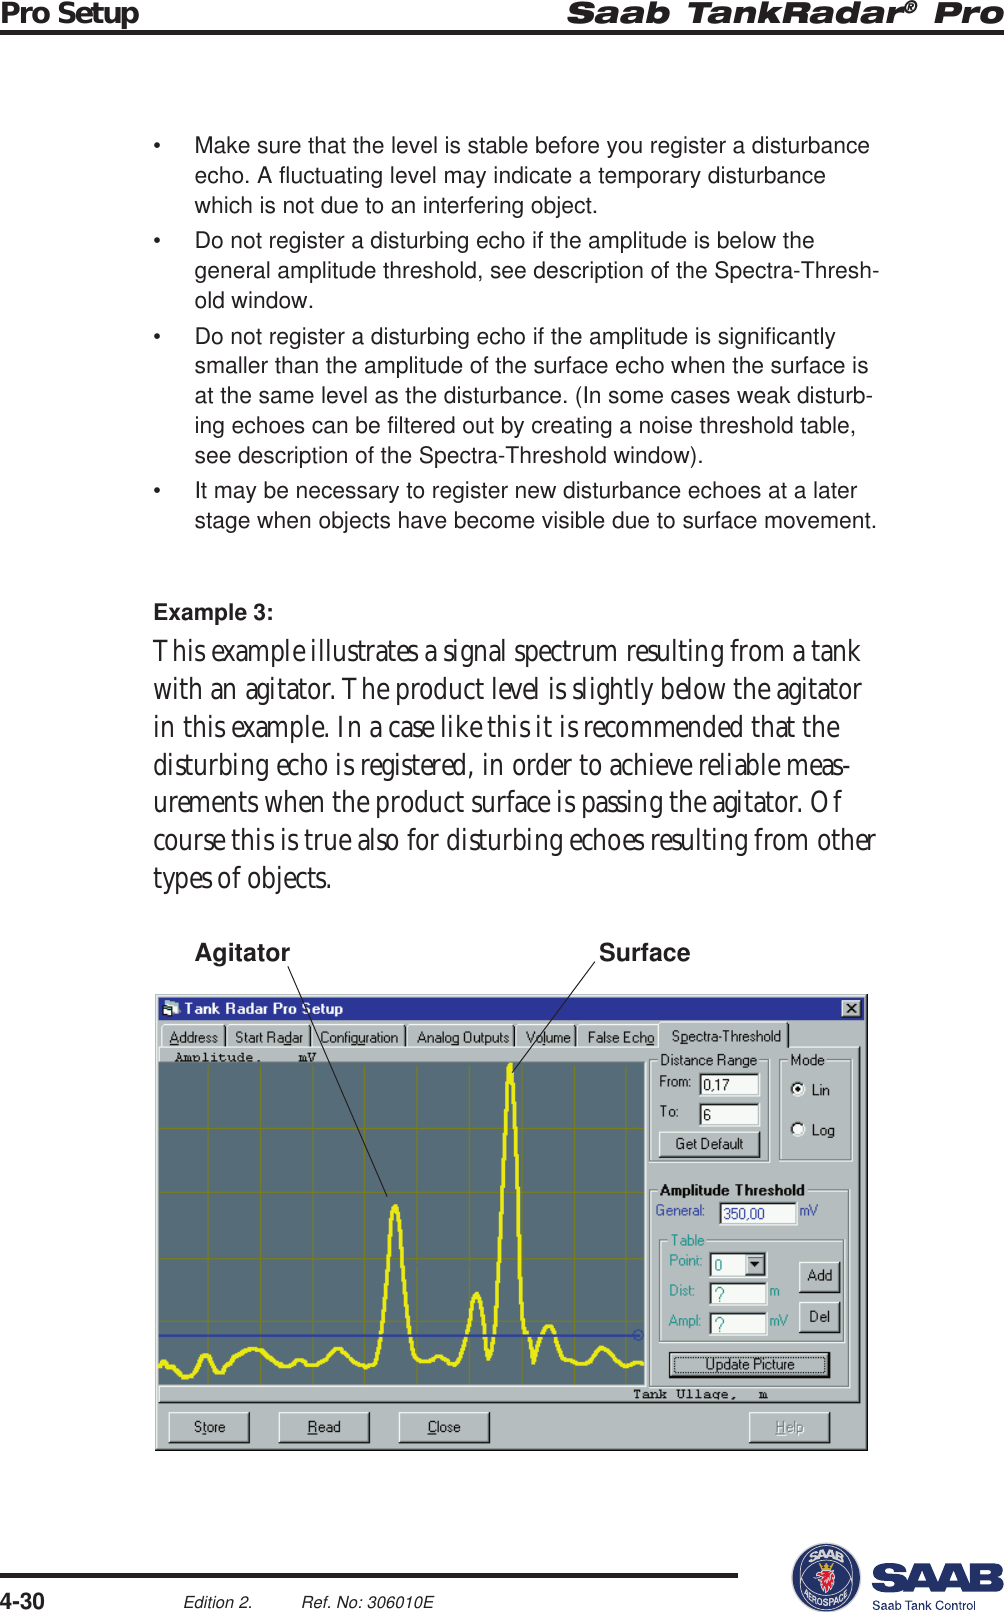 Saab TankRadar® ProPro Setup4-30Edition 2. Ref. No: 306010E• Make sure that the level is stable before you register a disturbanceecho. A fluctuating level may indicate a temporary disturbancewhich is not due to an interfering object.• Do not register a disturbing echo if the amplitude is below thegeneral amplitude threshold, see description of the Spectra-Thresh-old window.• Do not register a disturbing echo if the amplitude is significantlysmaller than the amplitude of the surface echo when the surface isat the same level as the disturbance. (In some cases weak disturb-ing echoes can be filtered out by creating a noise threshold table,see description of the Spectra-Threshold window).• It may be necessary to register new disturbance echoes at a laterstage when objects have become visible due to surface movement.Example 3:This example illustrates a signal spectrum resulting from a tankwith an agitator. The product level is slightly below the agitatorin this example. In a case like this it is recommended that thedisturbing echo is registered, in order to achieve reliable meas-urements when the product surface is passing the agitator. Ofcourse this is true also for disturbing echoes resulting from othertypes of objects.SurfaceAgitator